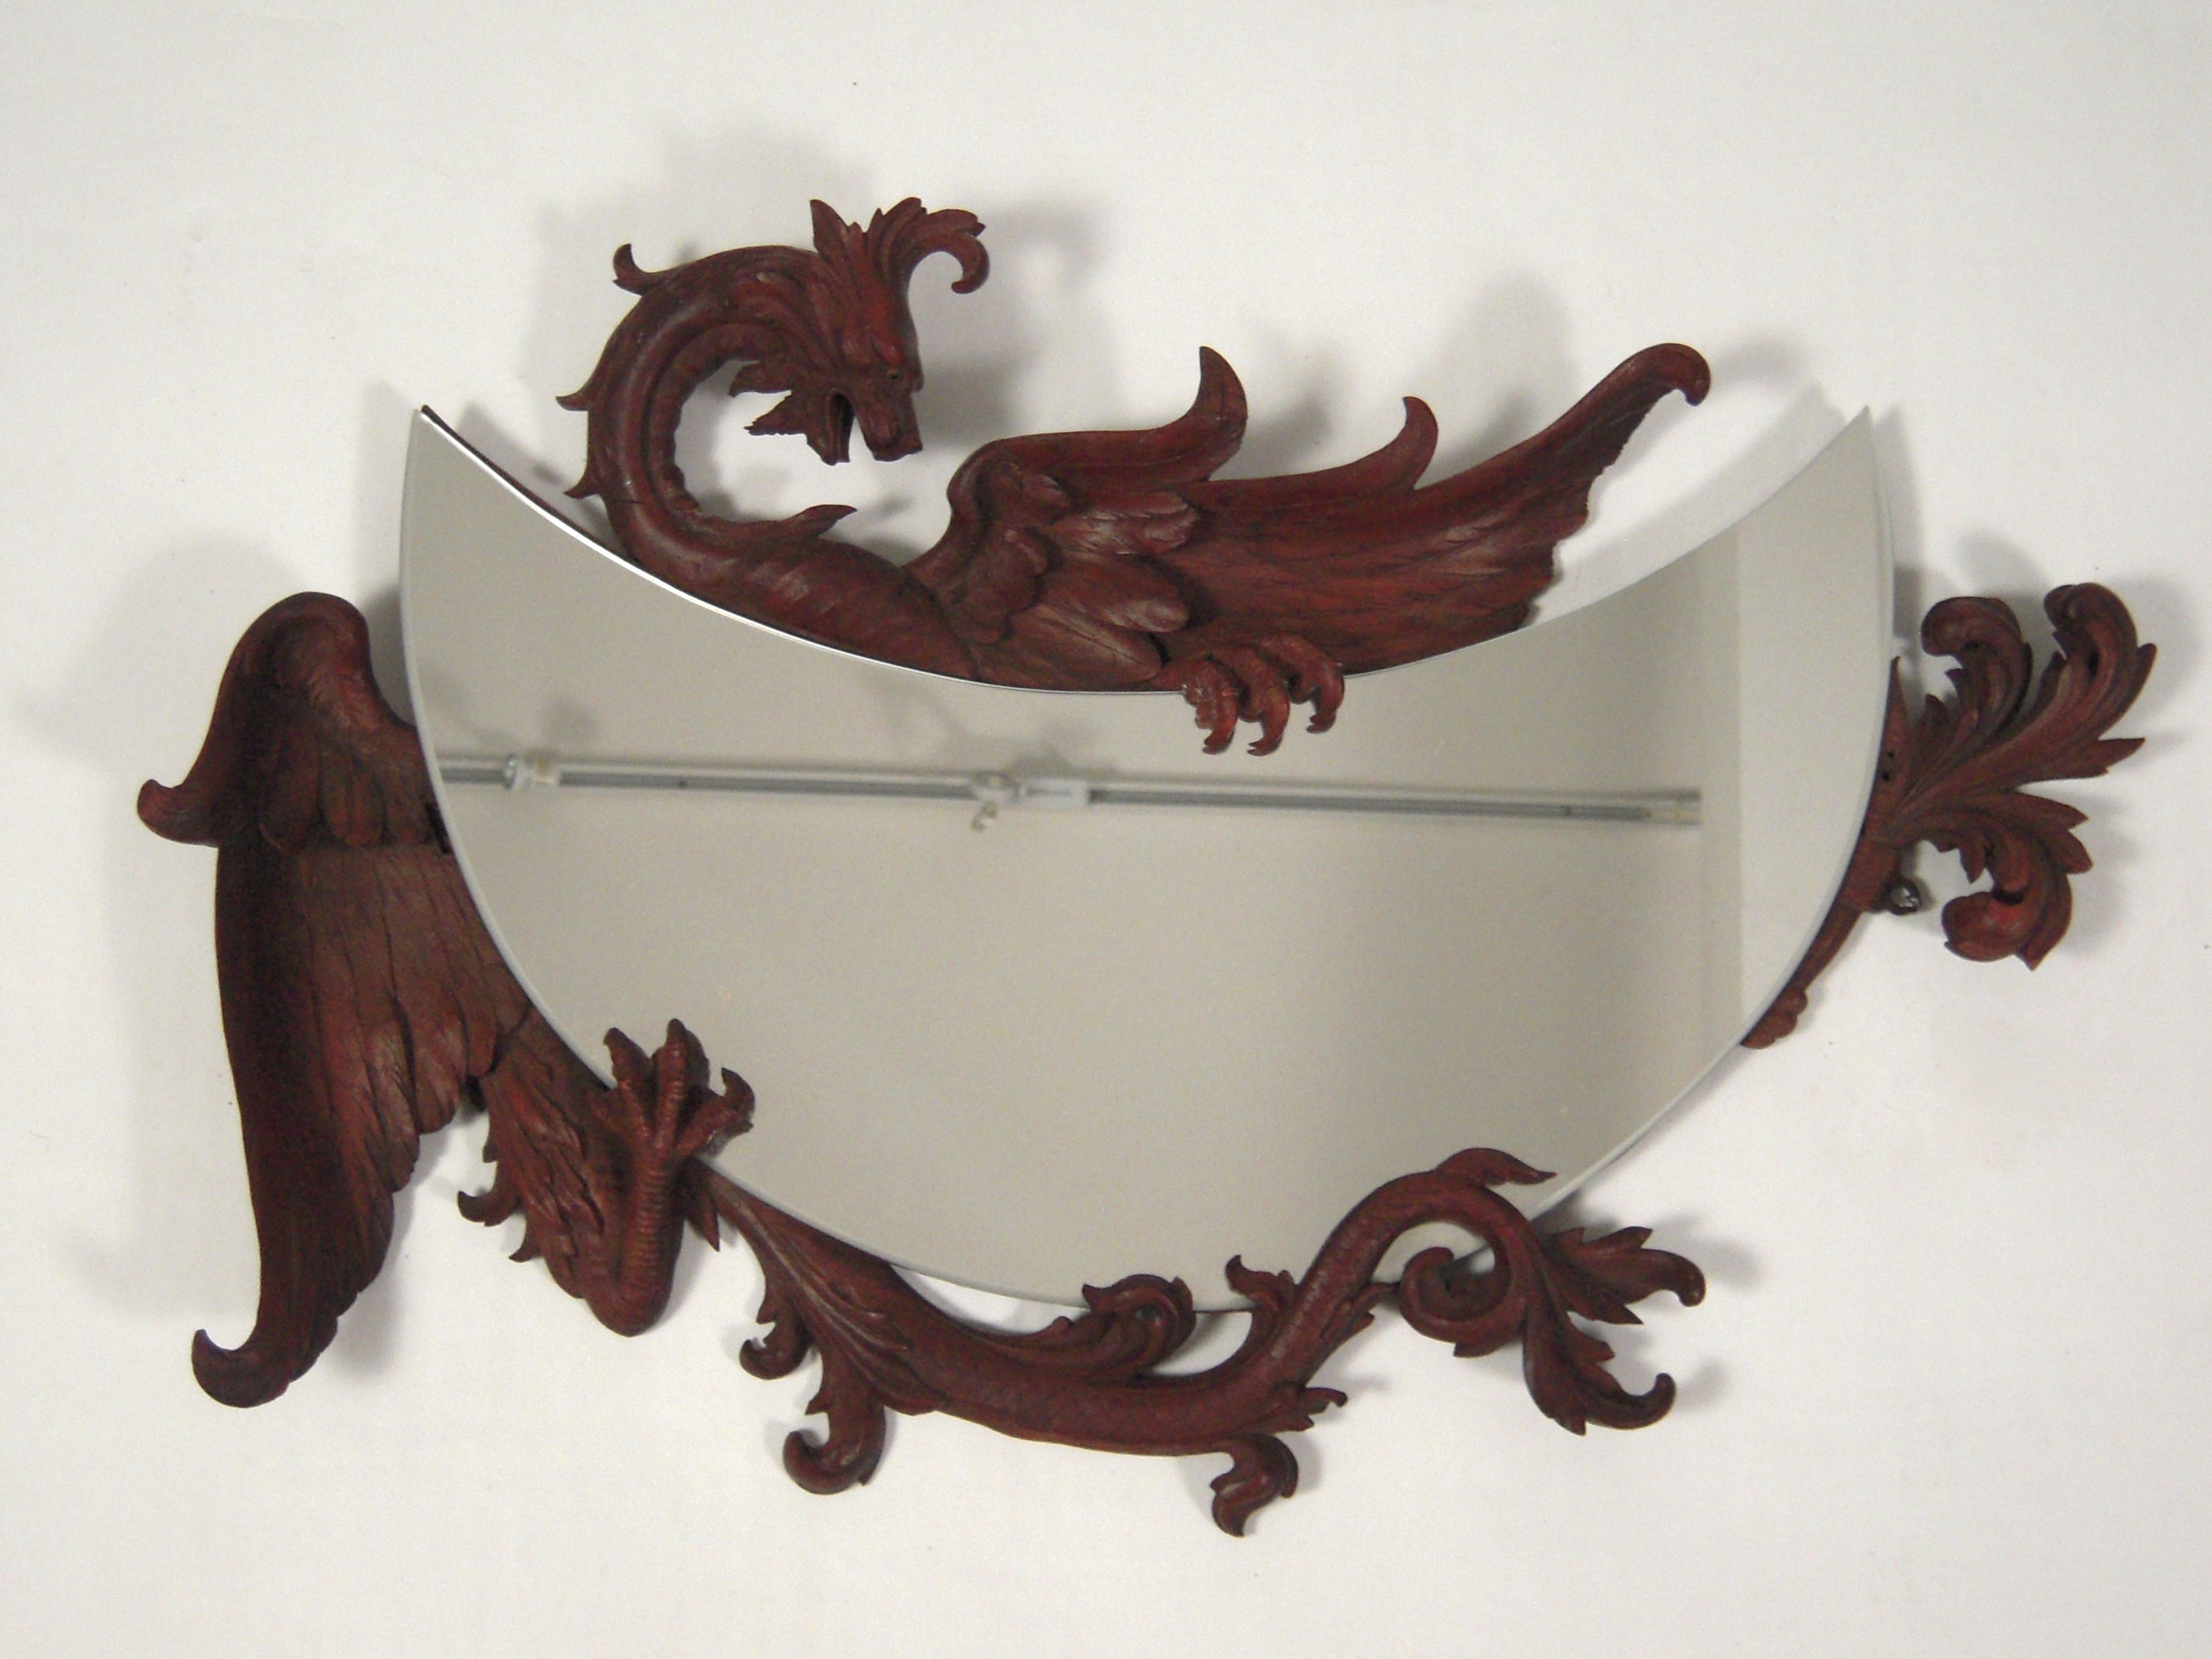 Superb Finely Carved Dragon Mirror Attributed to Gabriel Viardot